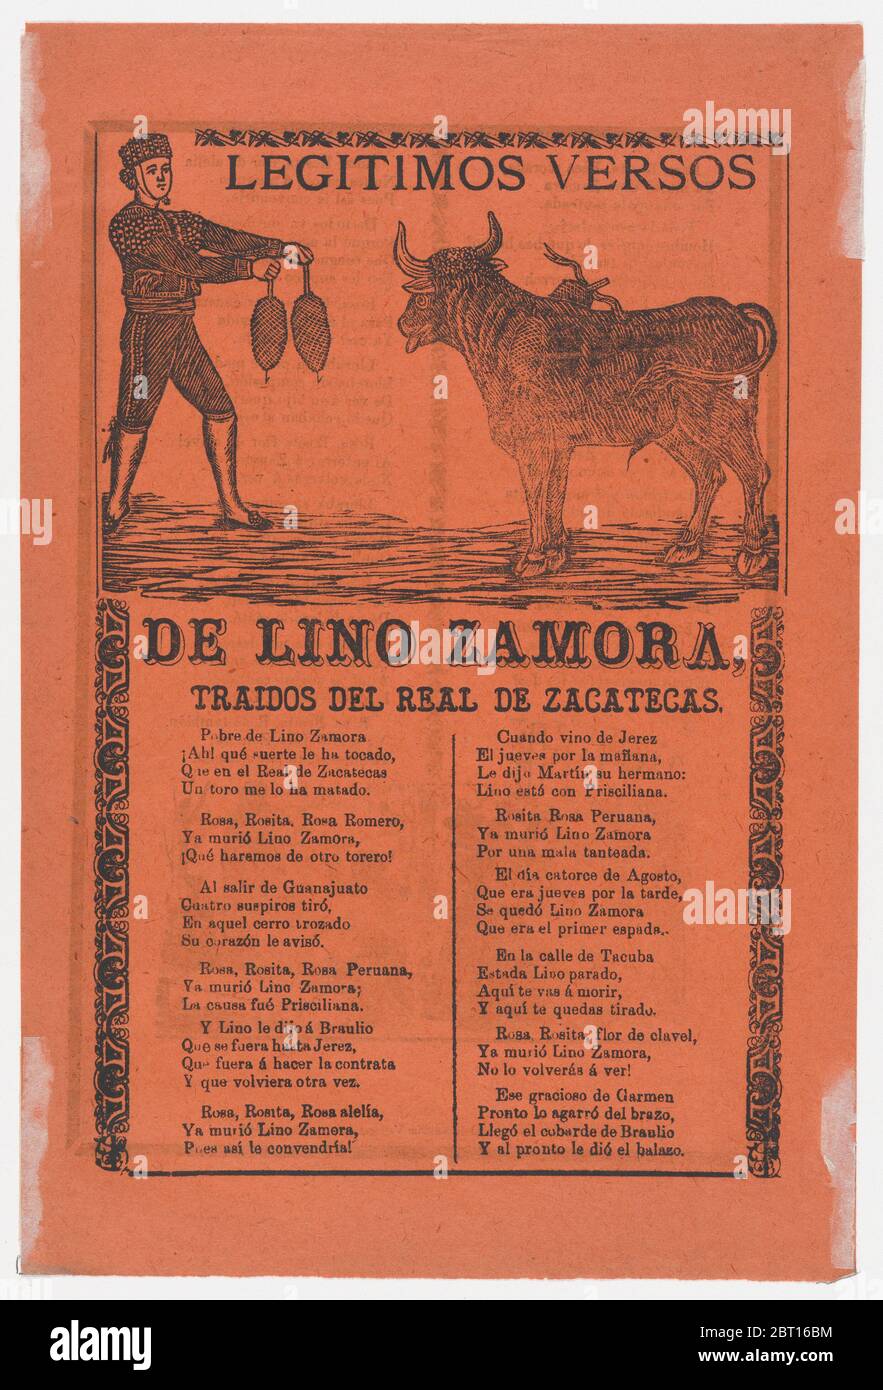 Broadside containing on recto, the legitimate verses of Lino Zamora brought from Real de Zacatecas (image of toreador and bull by Manilla) and a funeral scene on verso (?Posada), 1902 (published). Stock Photo